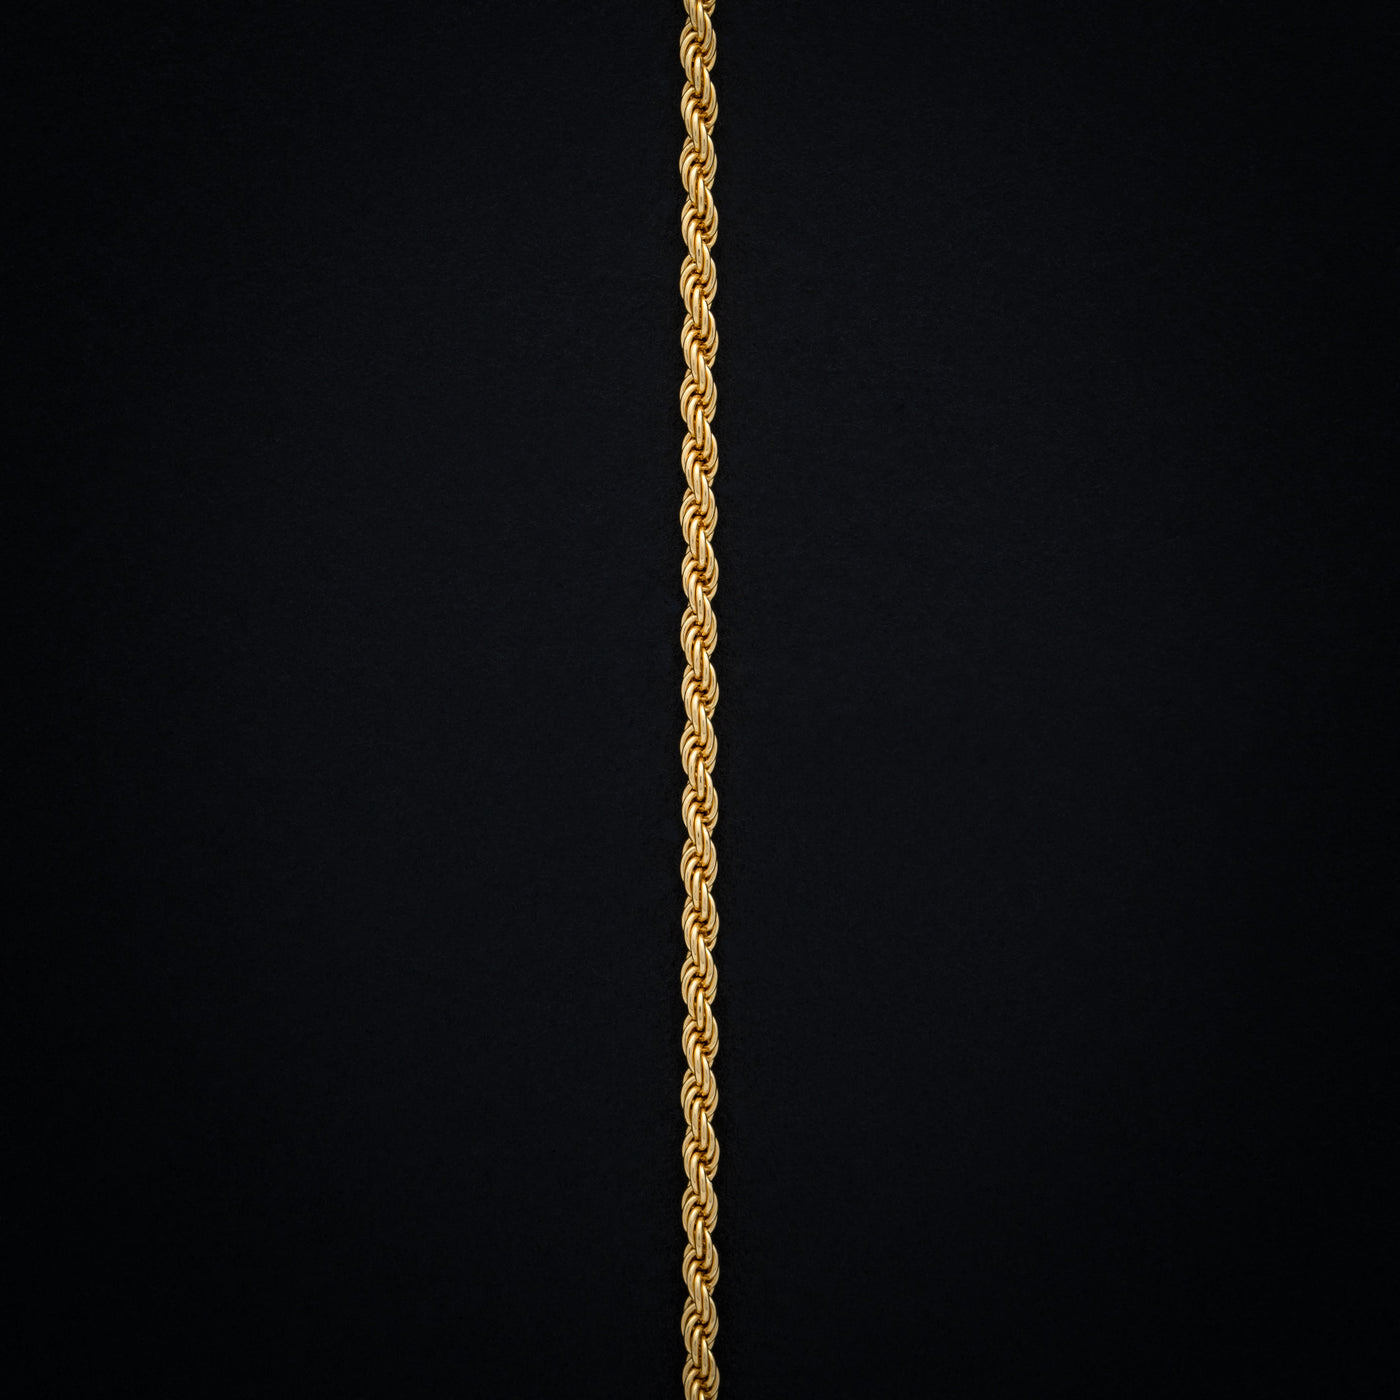 14K SOLID GOLD ROPE CHAIN